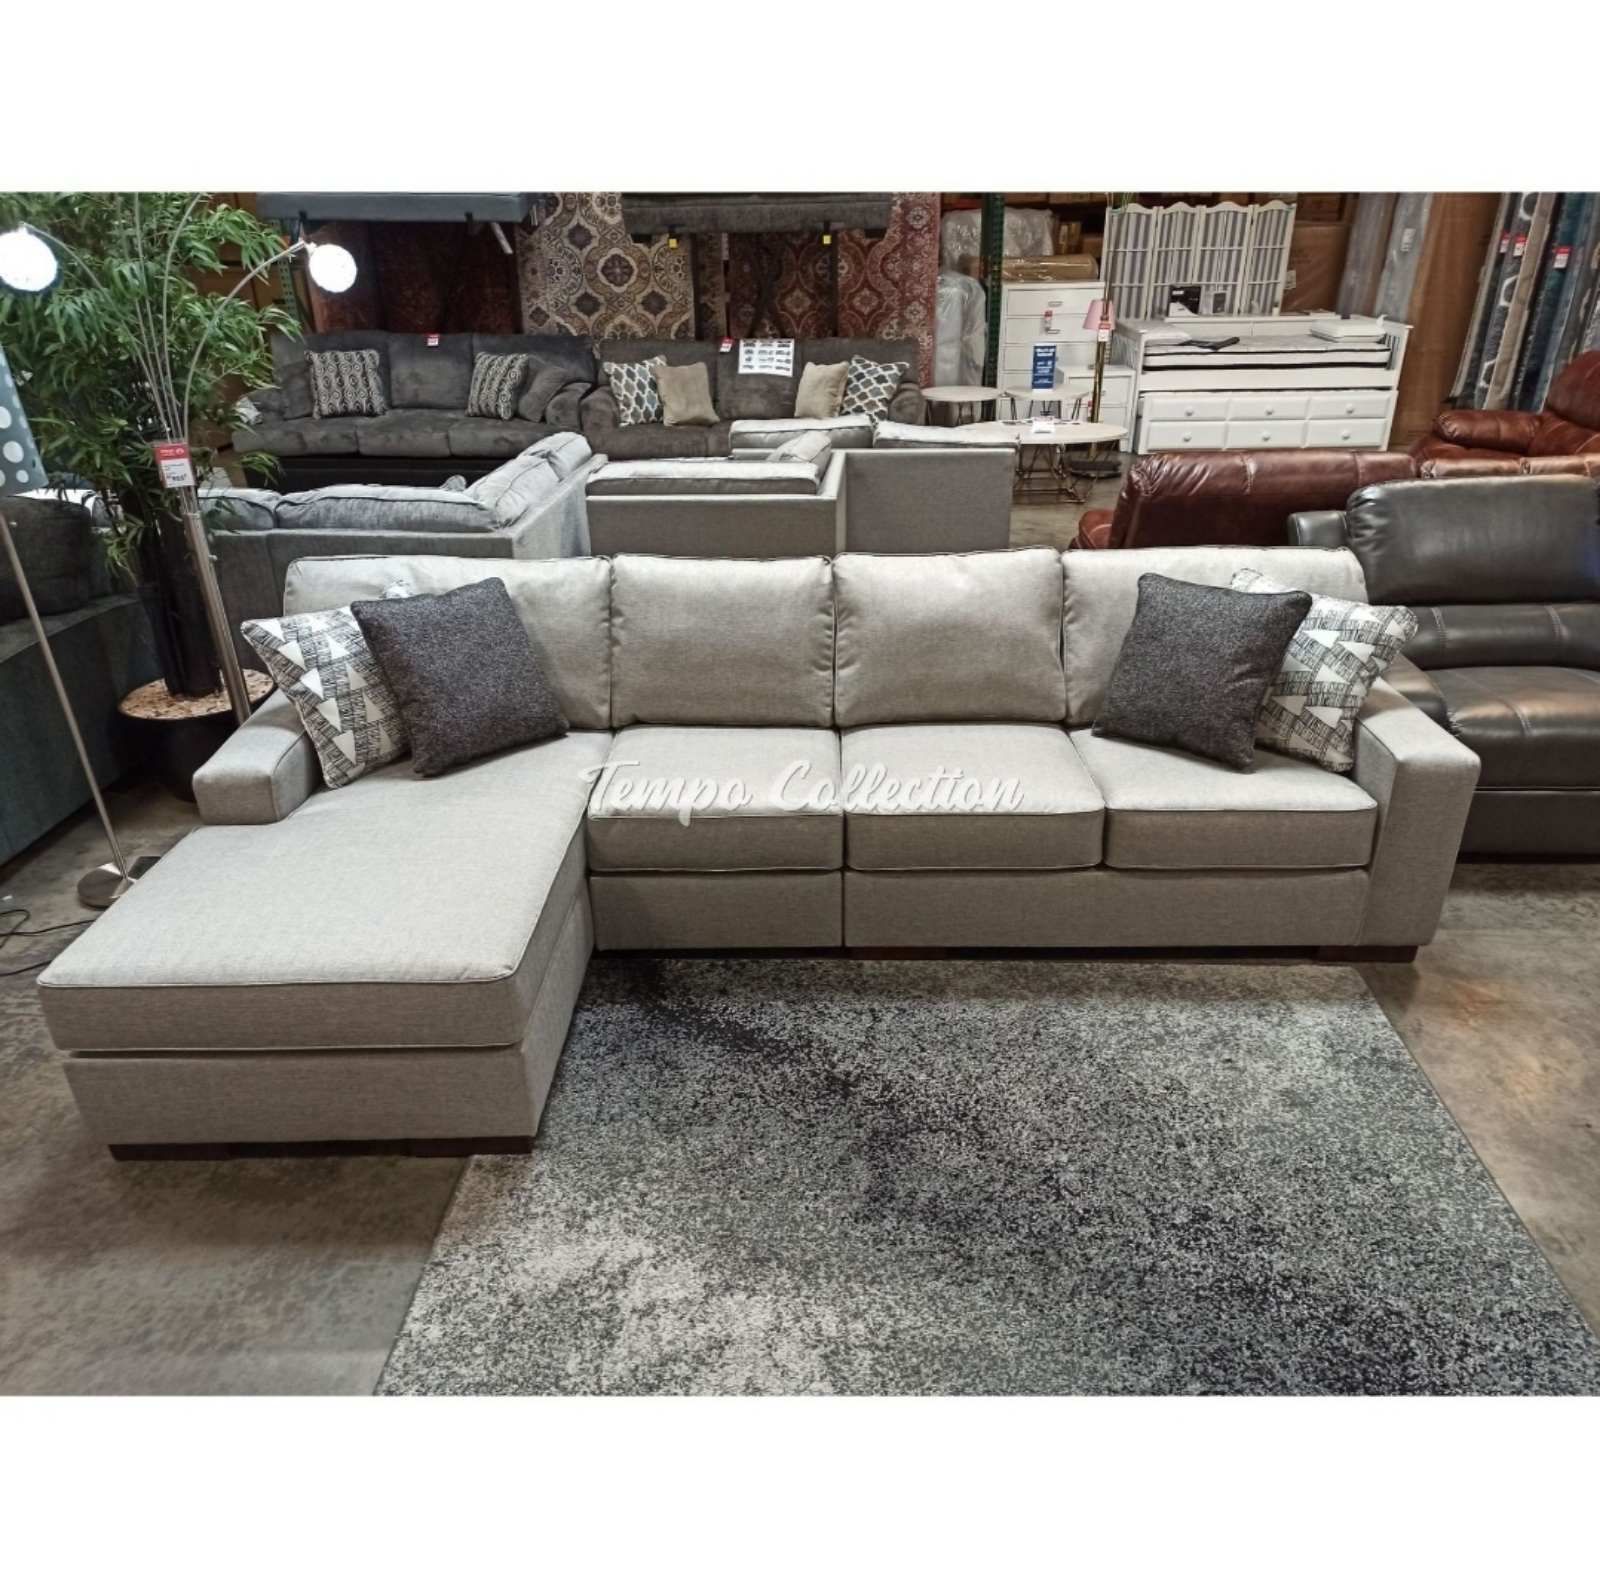 Easy Care Fabric, L Shaped Sectional, Slate Color, SKU#1041902L3P